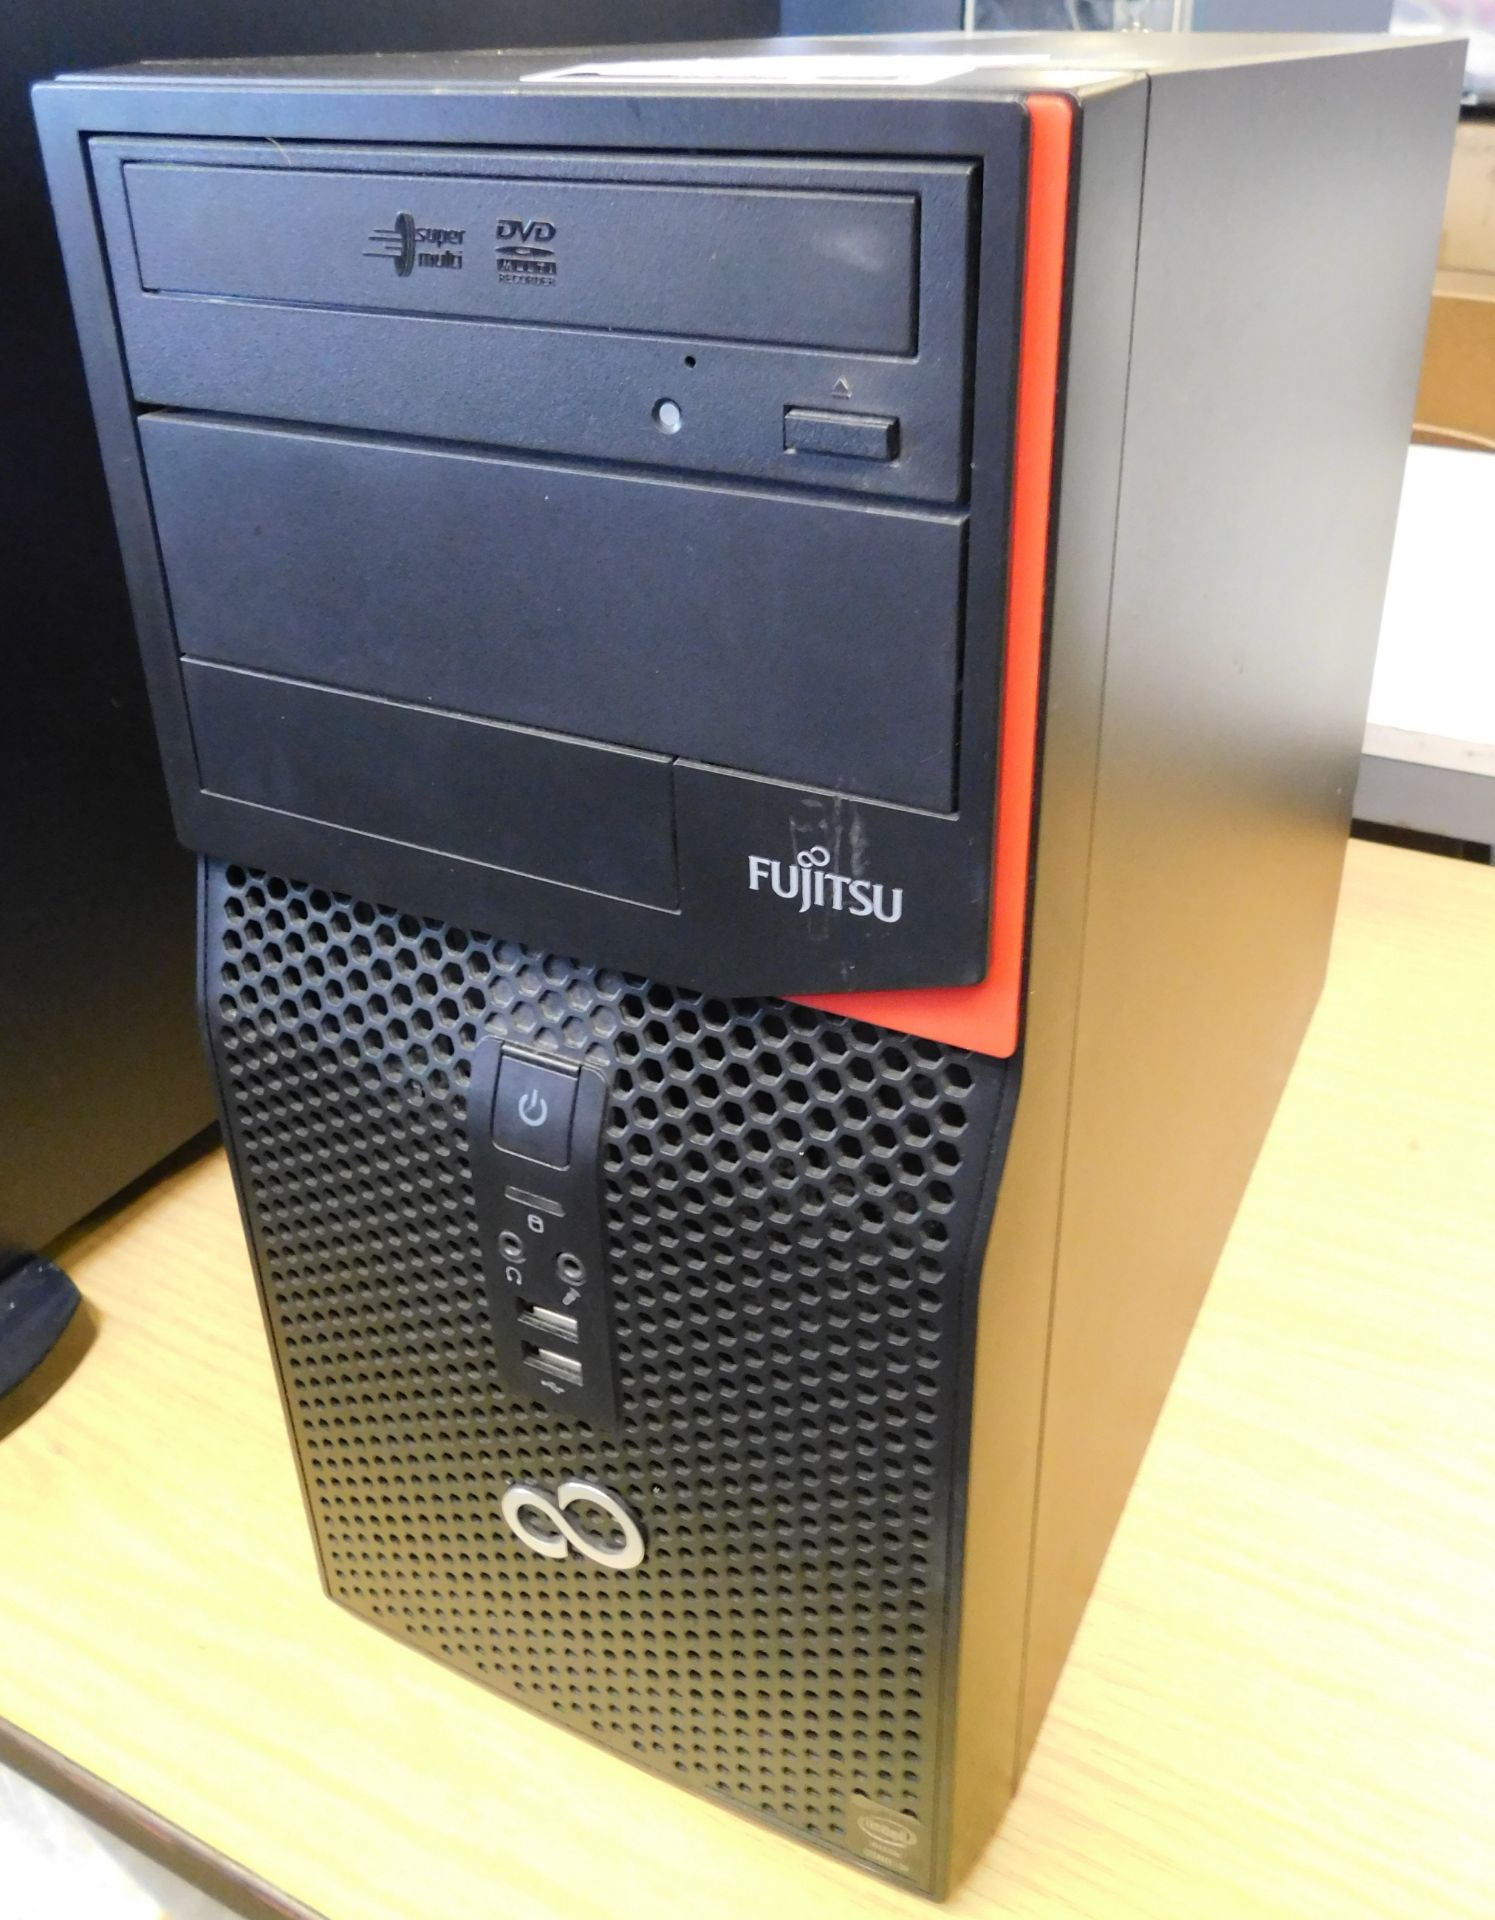 Fujitsu Esprimo P420 E85+ PC (No HDD) (Location: Stockport. Please Refer to General Notes) - Image 2 of 4